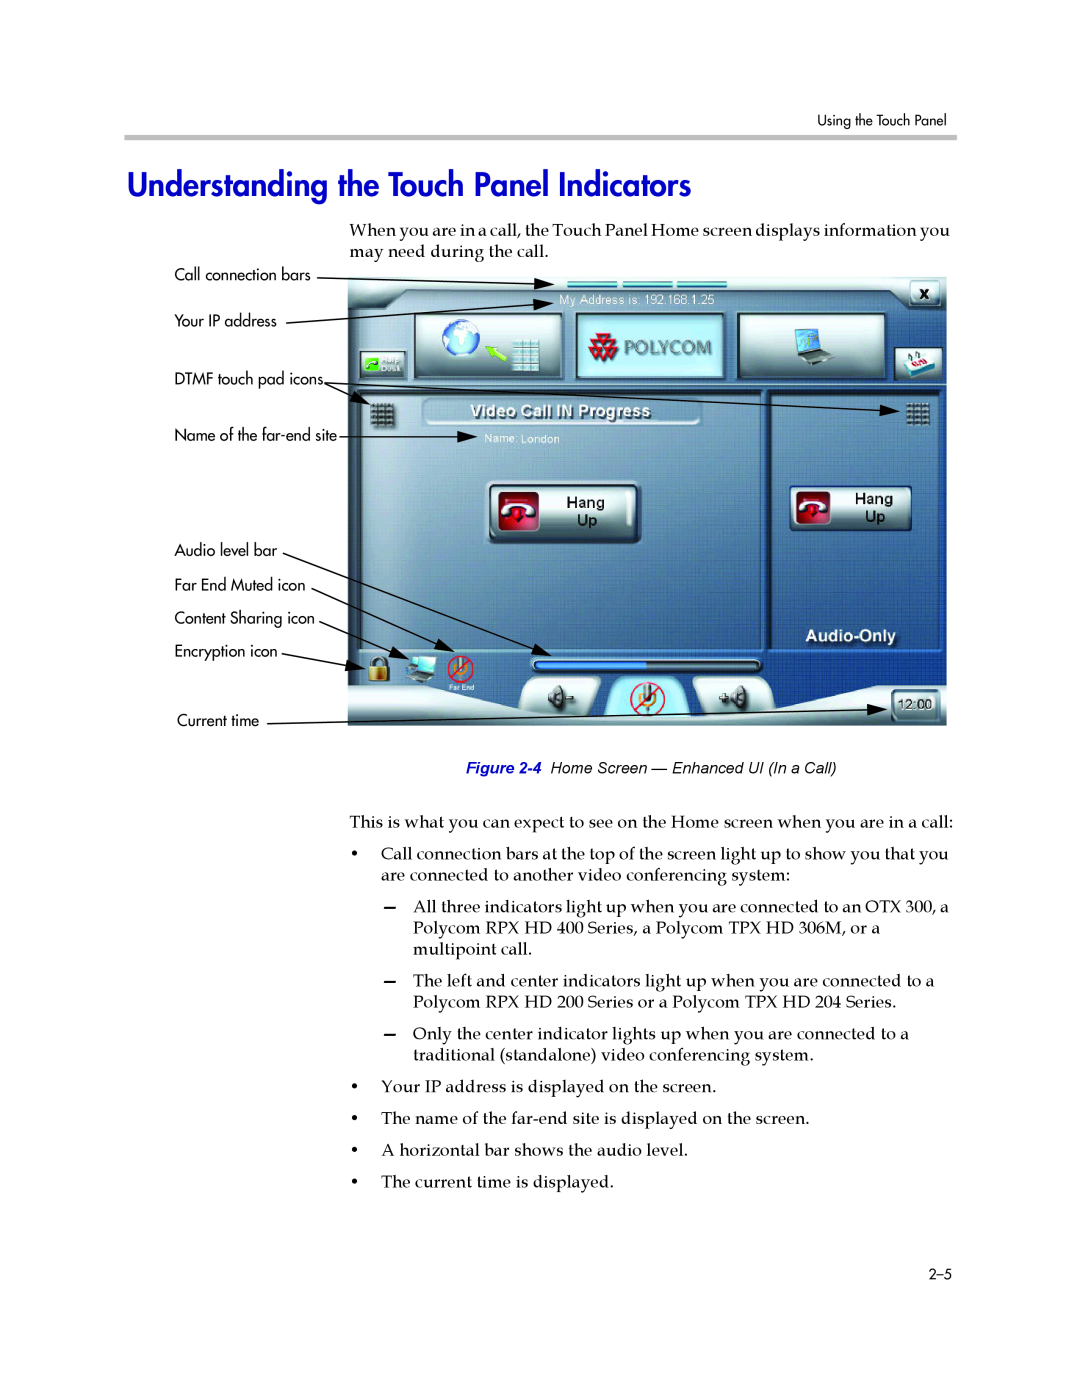 Polycom 300 manual Understanding the Touch Panel Indicators 